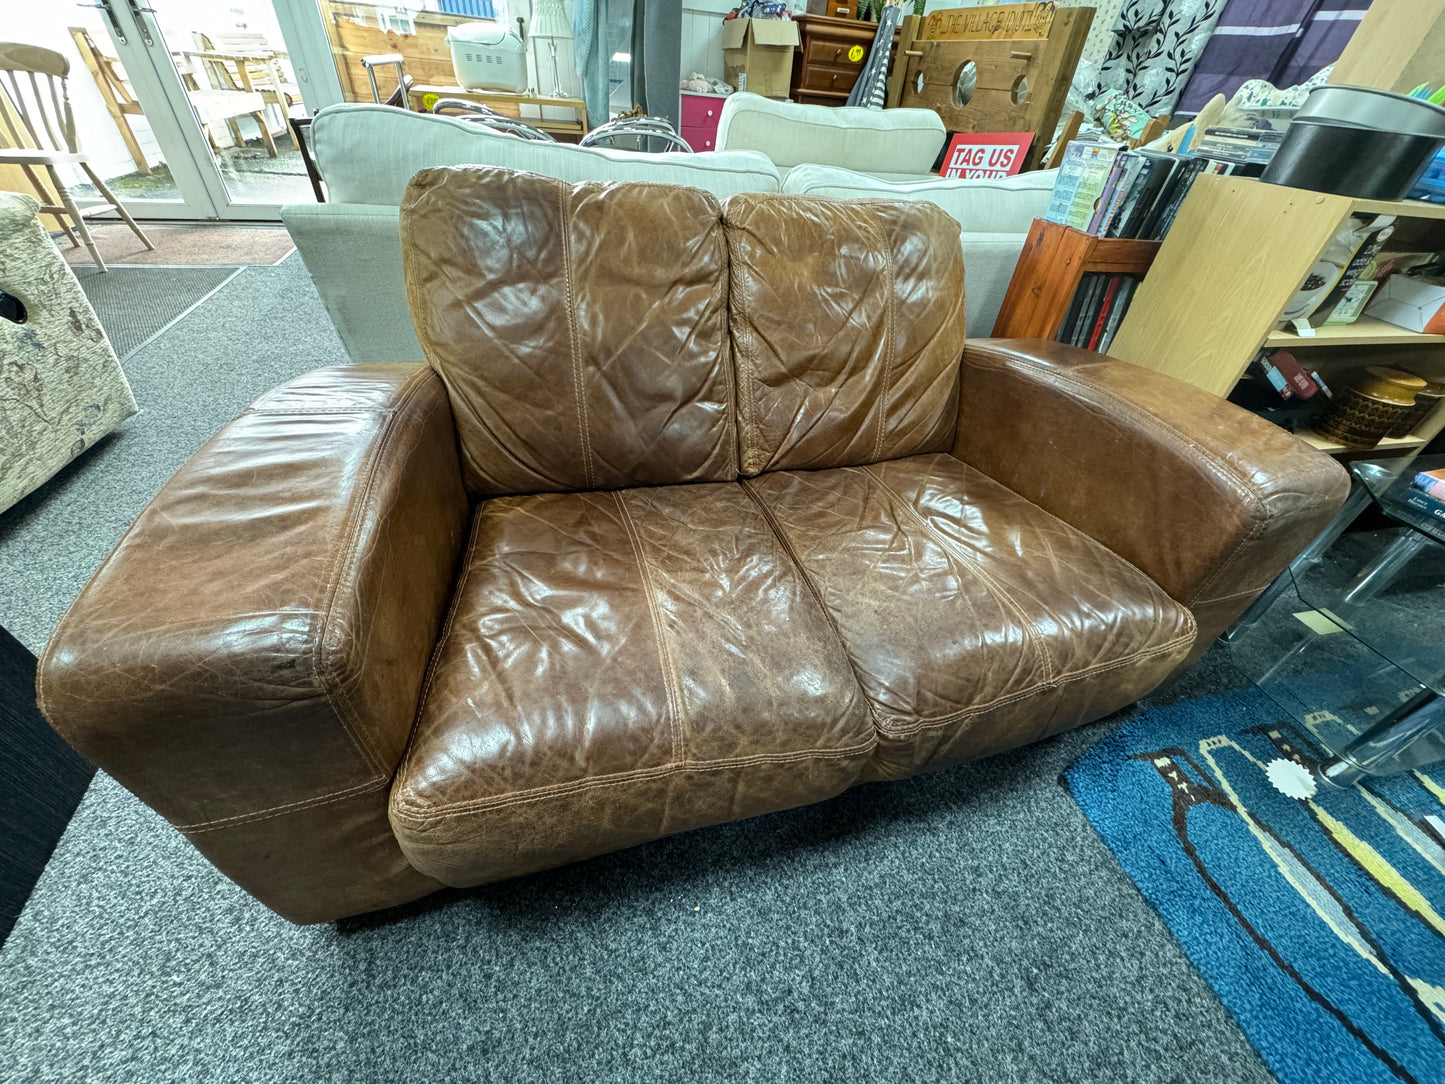 Brown leather 2 seater sofa